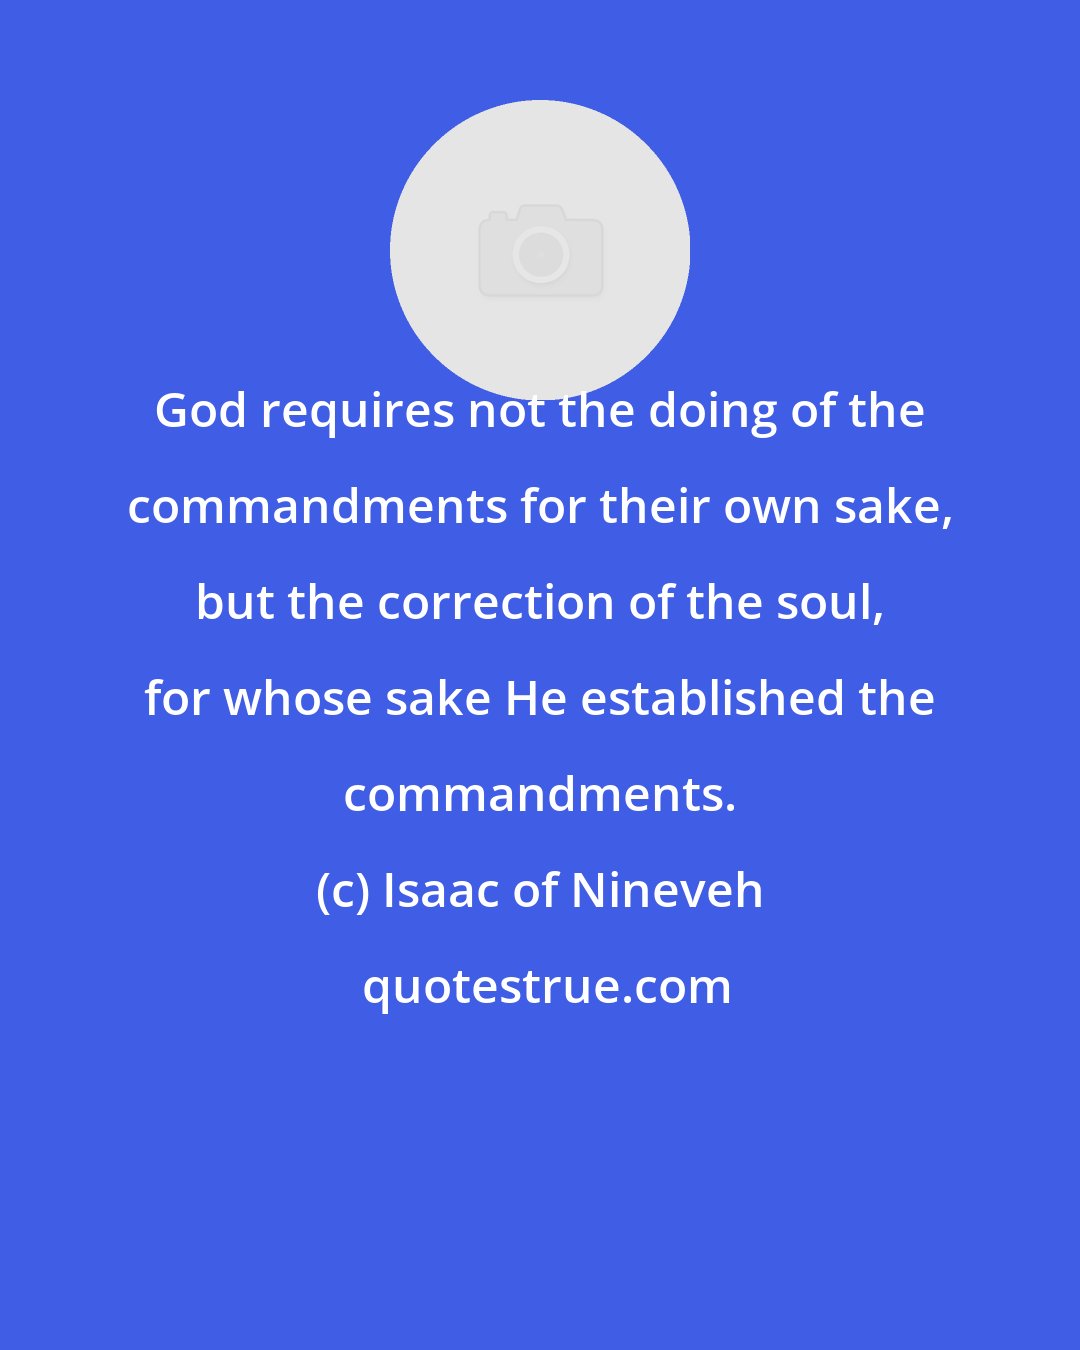 Isaac of Nineveh: God requires not the doing of the commandments for their own sake, but the correction of the soul, for whose sake He established the commandments.